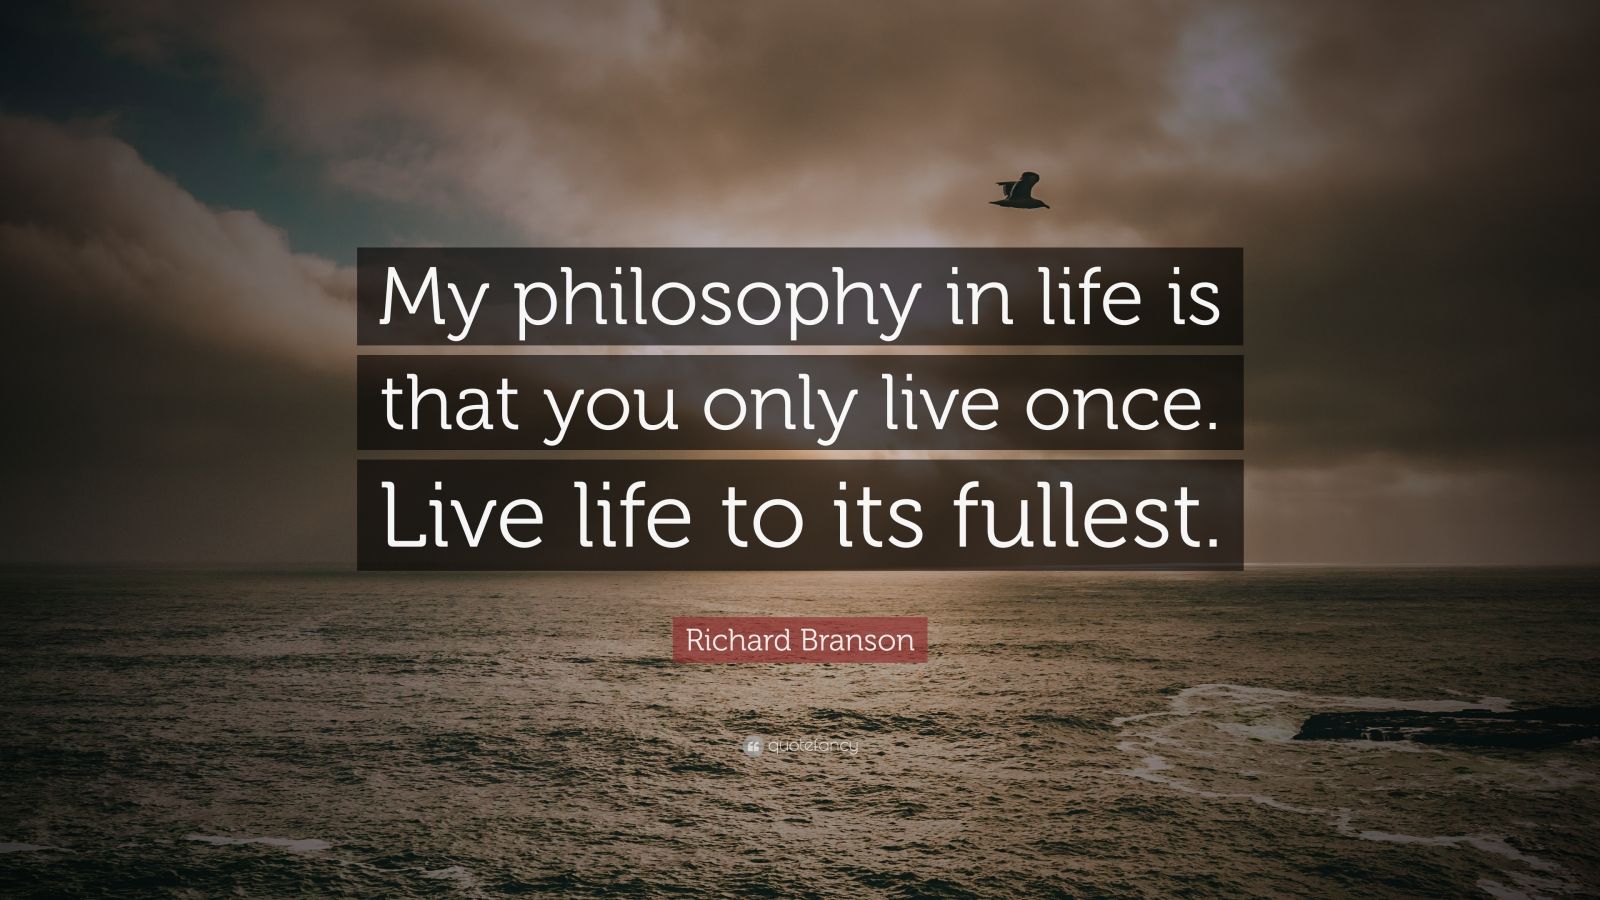 Richard Branson Quote: “My philosophy in life is that you only live